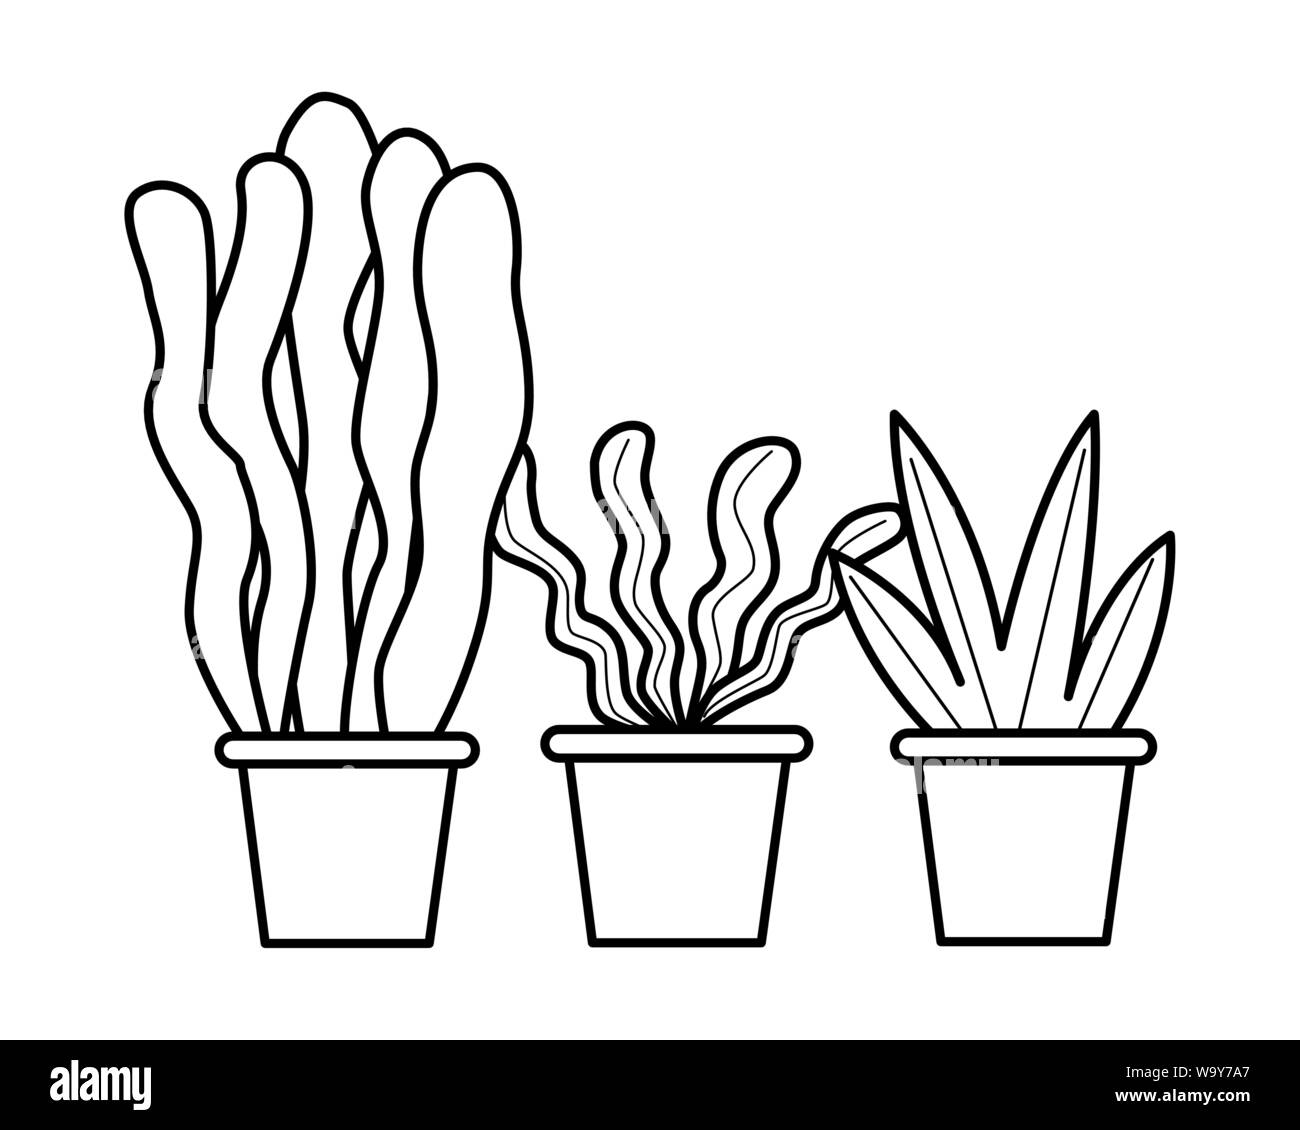 Decorative set of plant pots cartoons in black and white Stock Vector